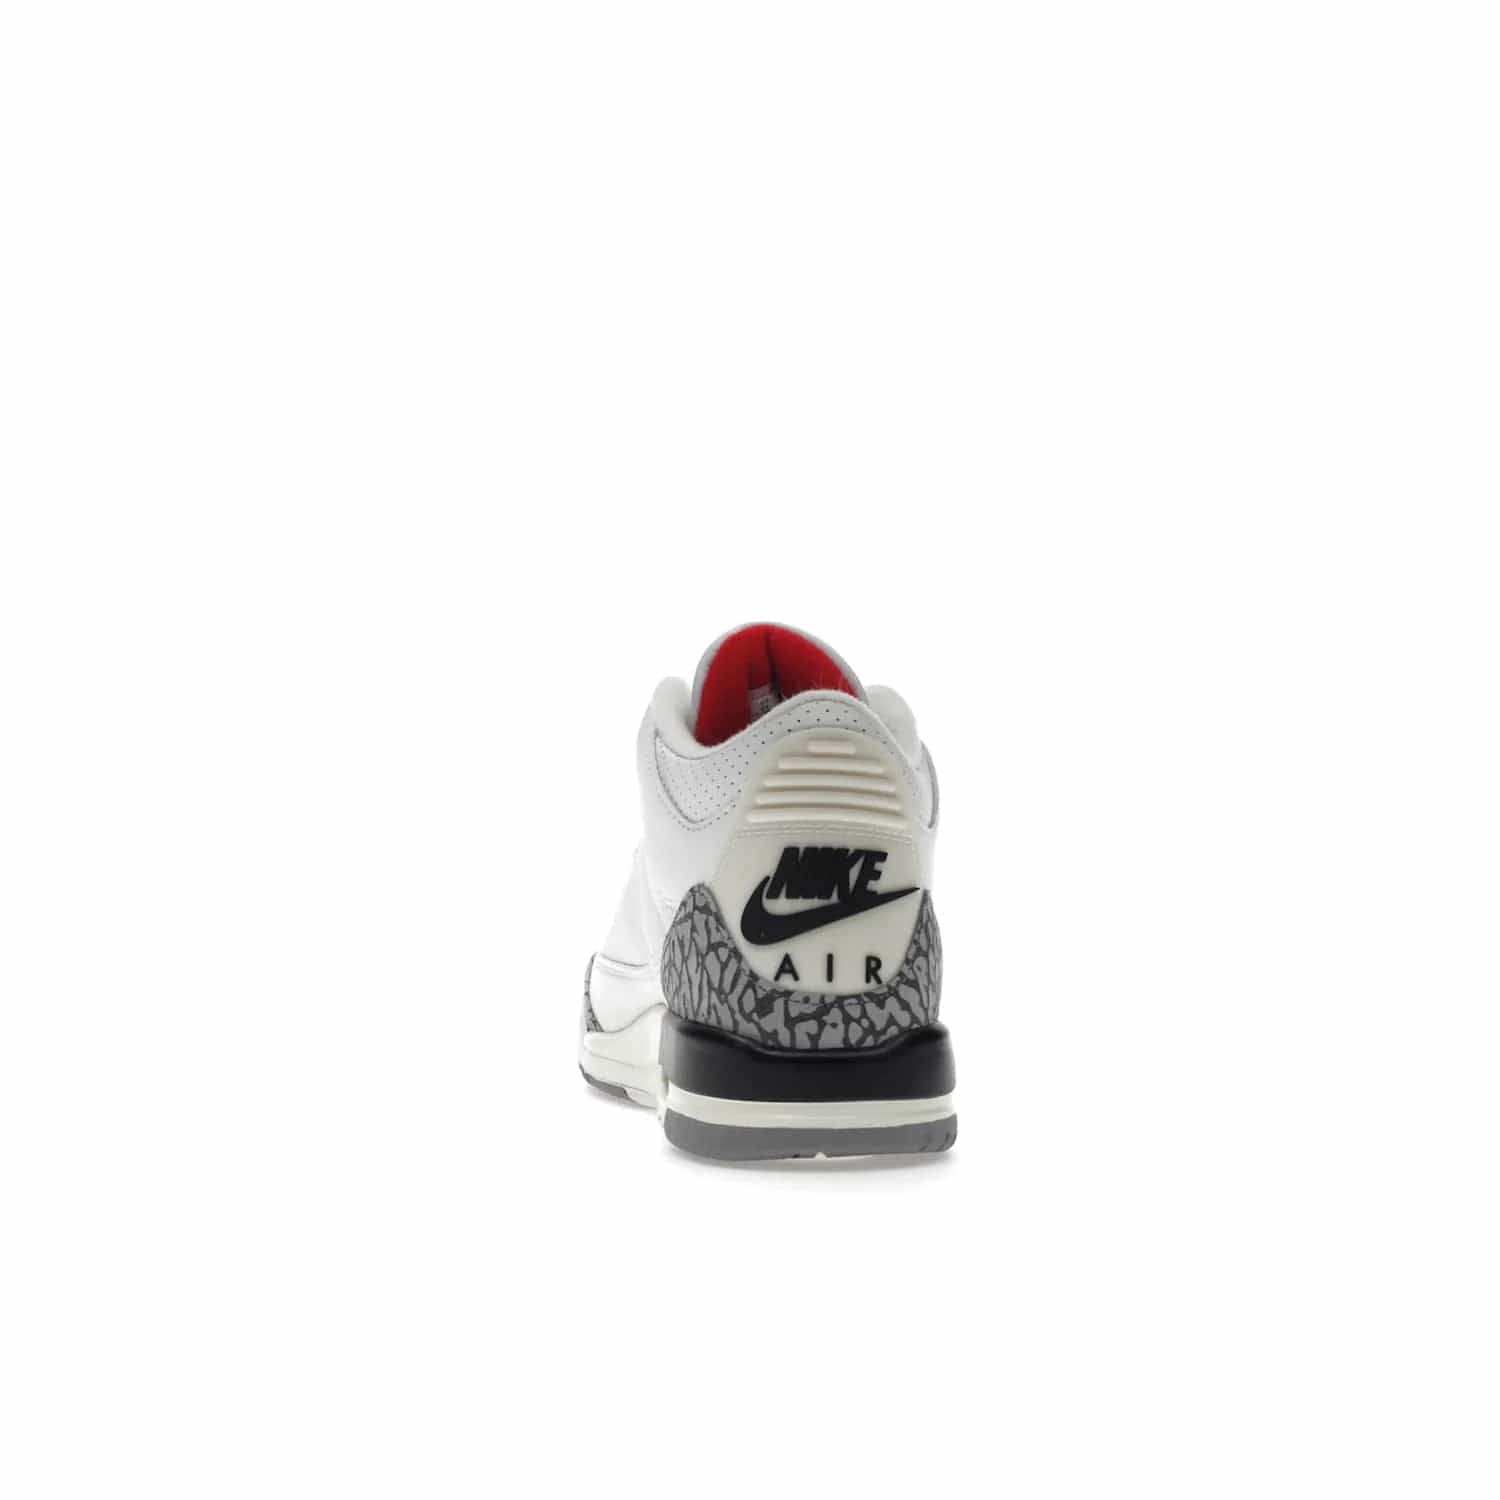 Jordan 3 Retro White Cement Reimagined (GS) - Image 27 - Only at www.BallersClubKickz.com - Grab the perfect blend of modern design and classic style with the Jordan 3 Retro White Cement Reimagined (GS). Features Summit White, Fire Red, Black, and Cement Grey colorway, iconic Jordan logo embroidered on the tongue, and “Nike Air” branding. Limited availability, get your pair before March 11th 2023.